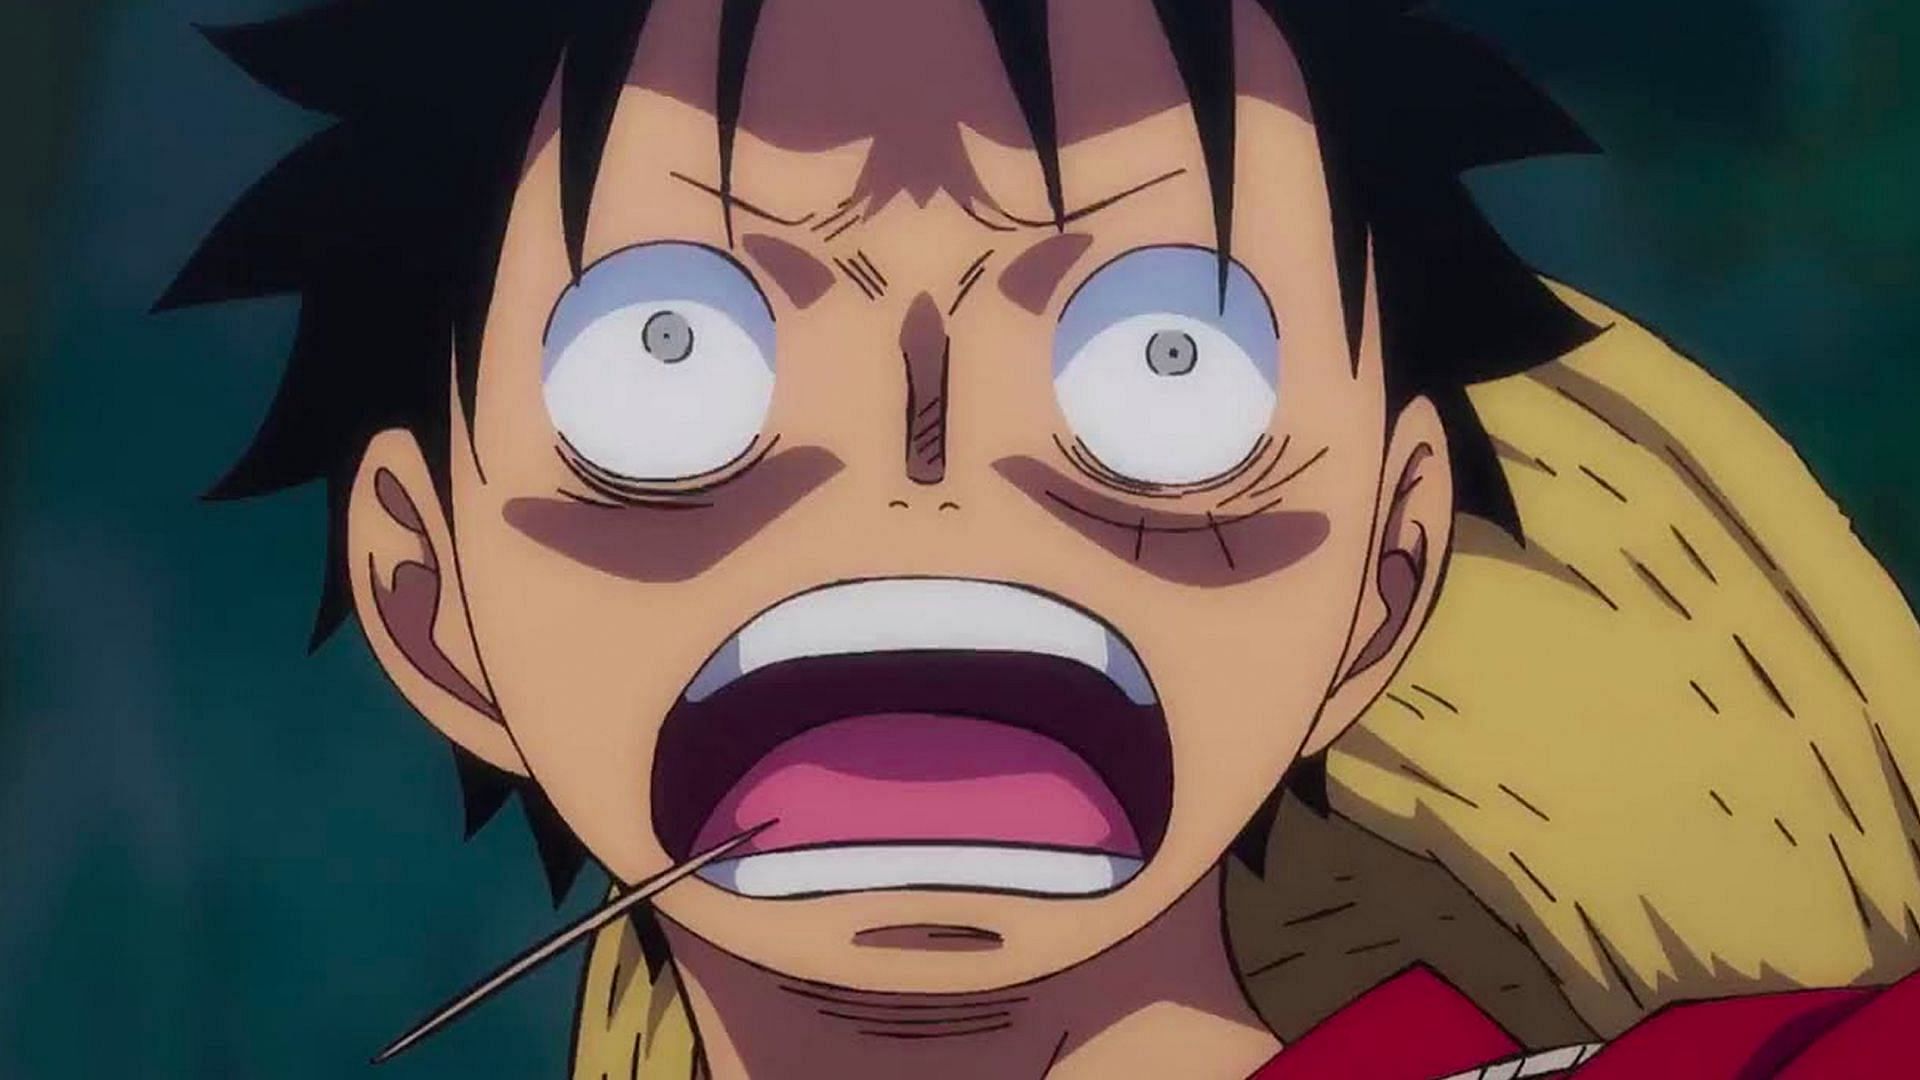 The Ultimate One Piece Spoiler - Unveiling the Mystery of the Red Line —  Eightify